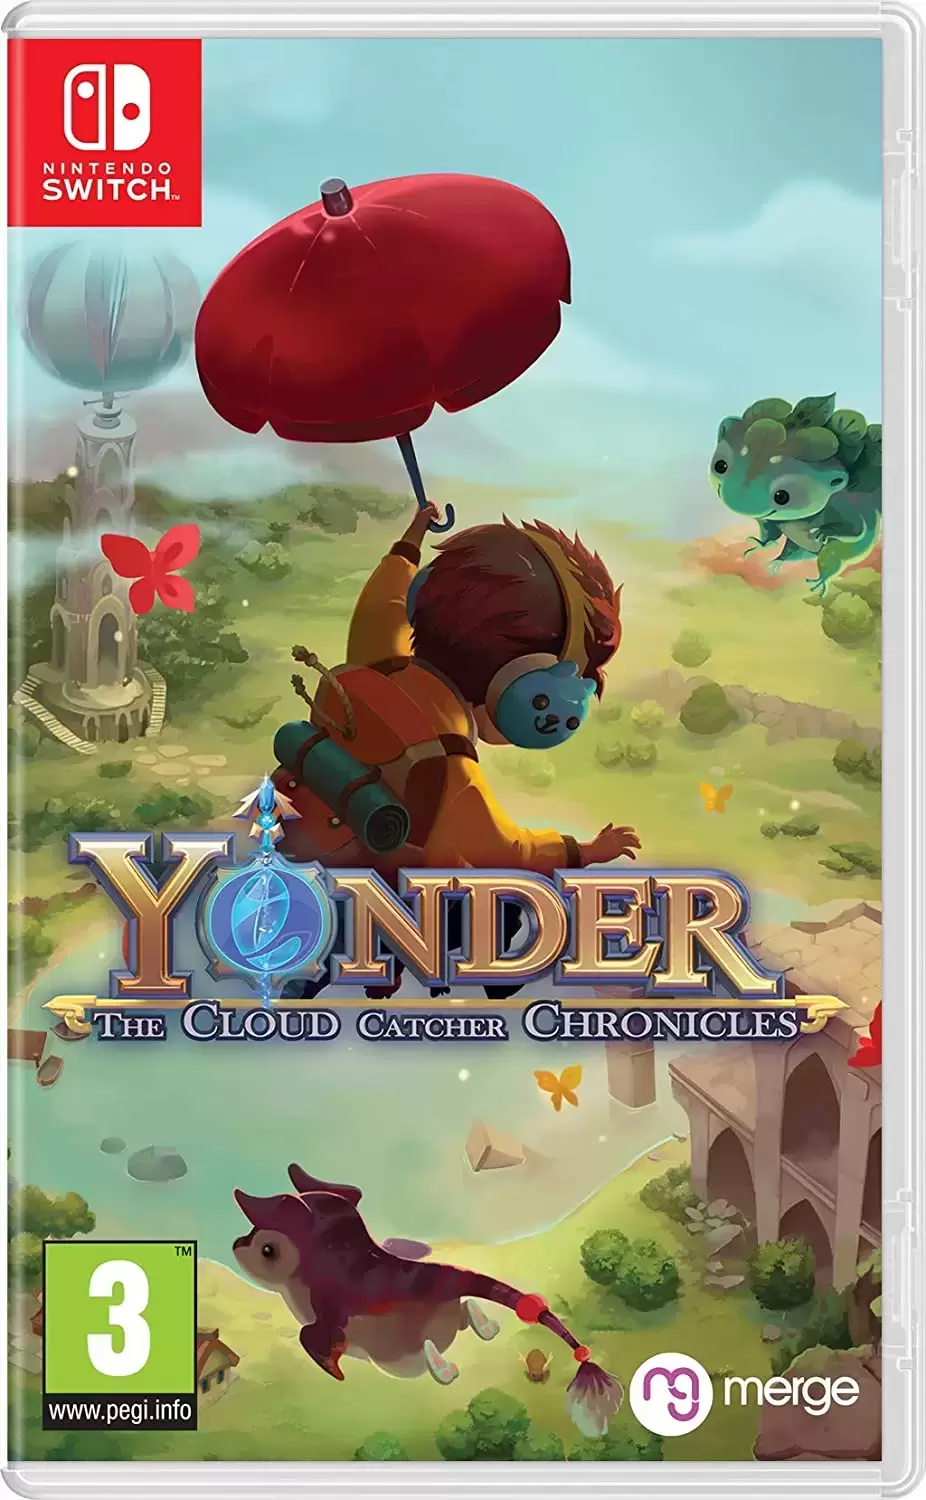 Nintendo Switch Games - Yonder the cloud catcher chronicles